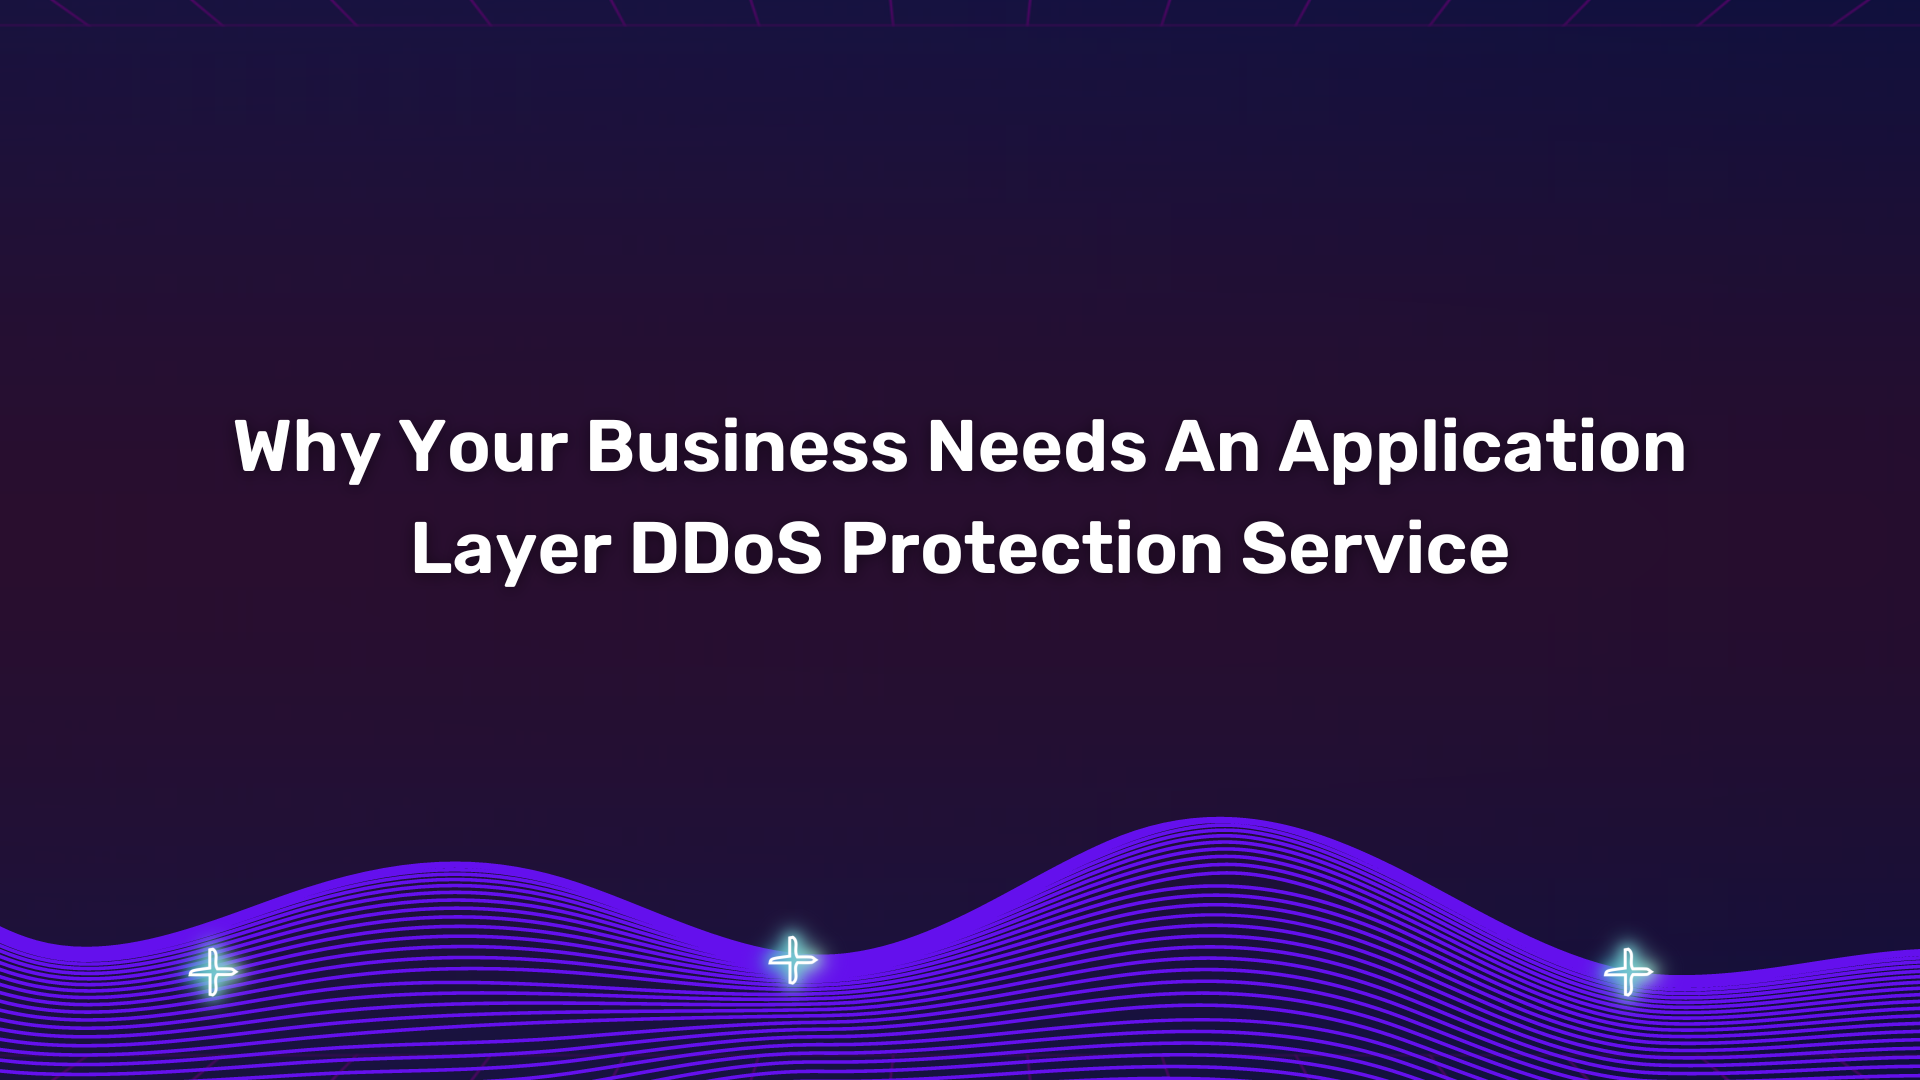 Why Your Business Needs An Application Layer DDoS Protection Service